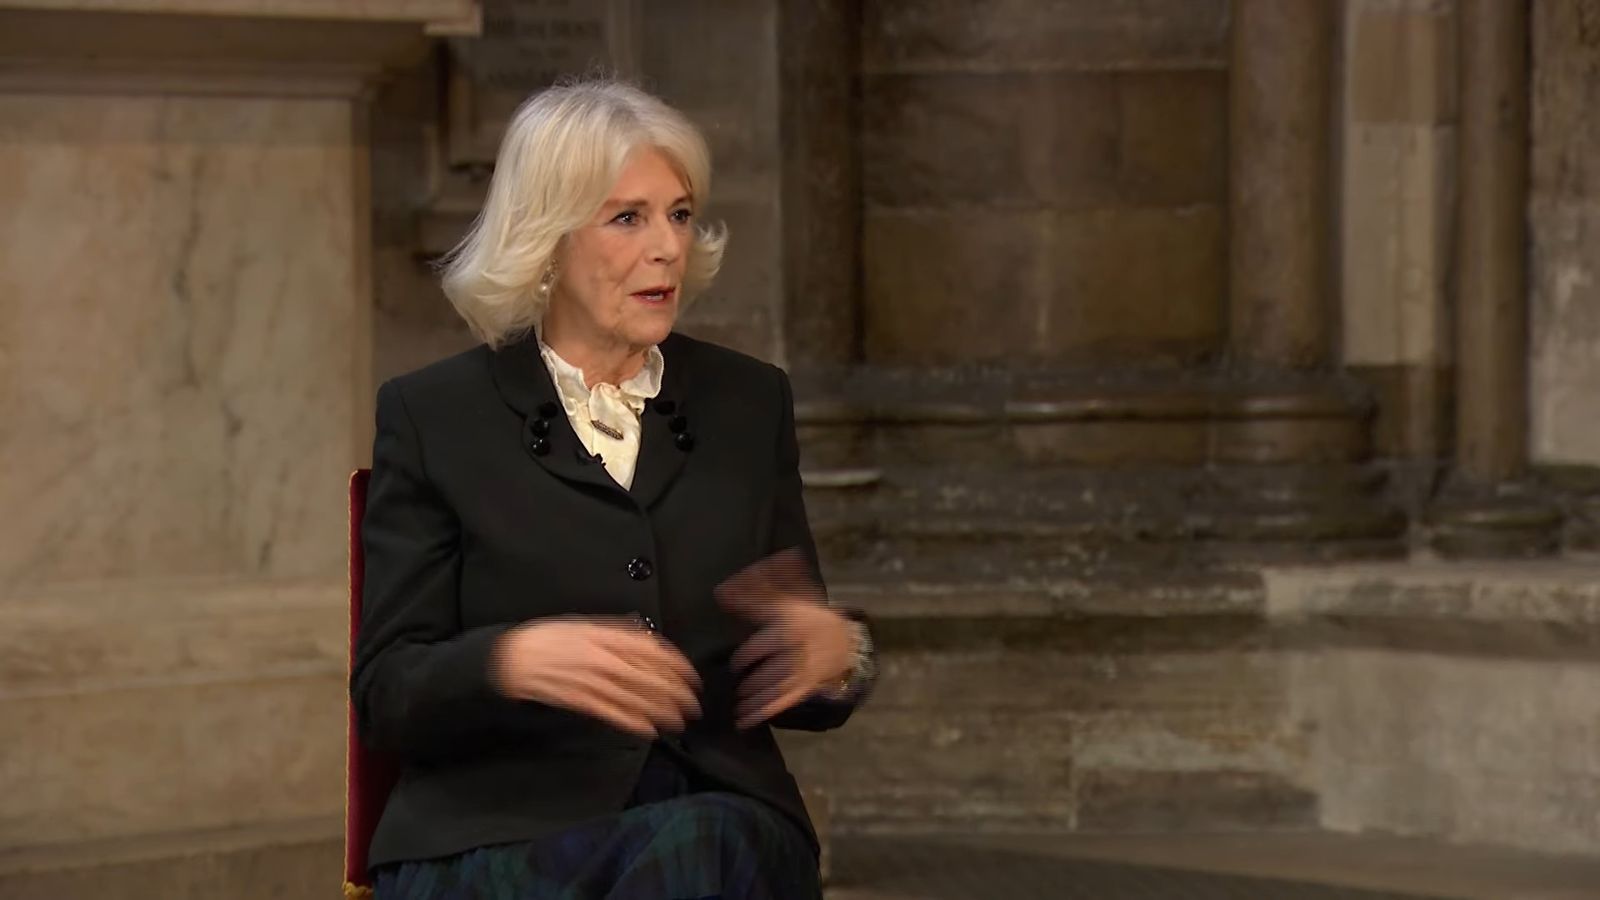 camilla-parker-bowles-shock-did-prince-charles-wife-respond-to-allegations-that-shes-the-racist-royal-prince-harry-meghan-markle-were-referring-to